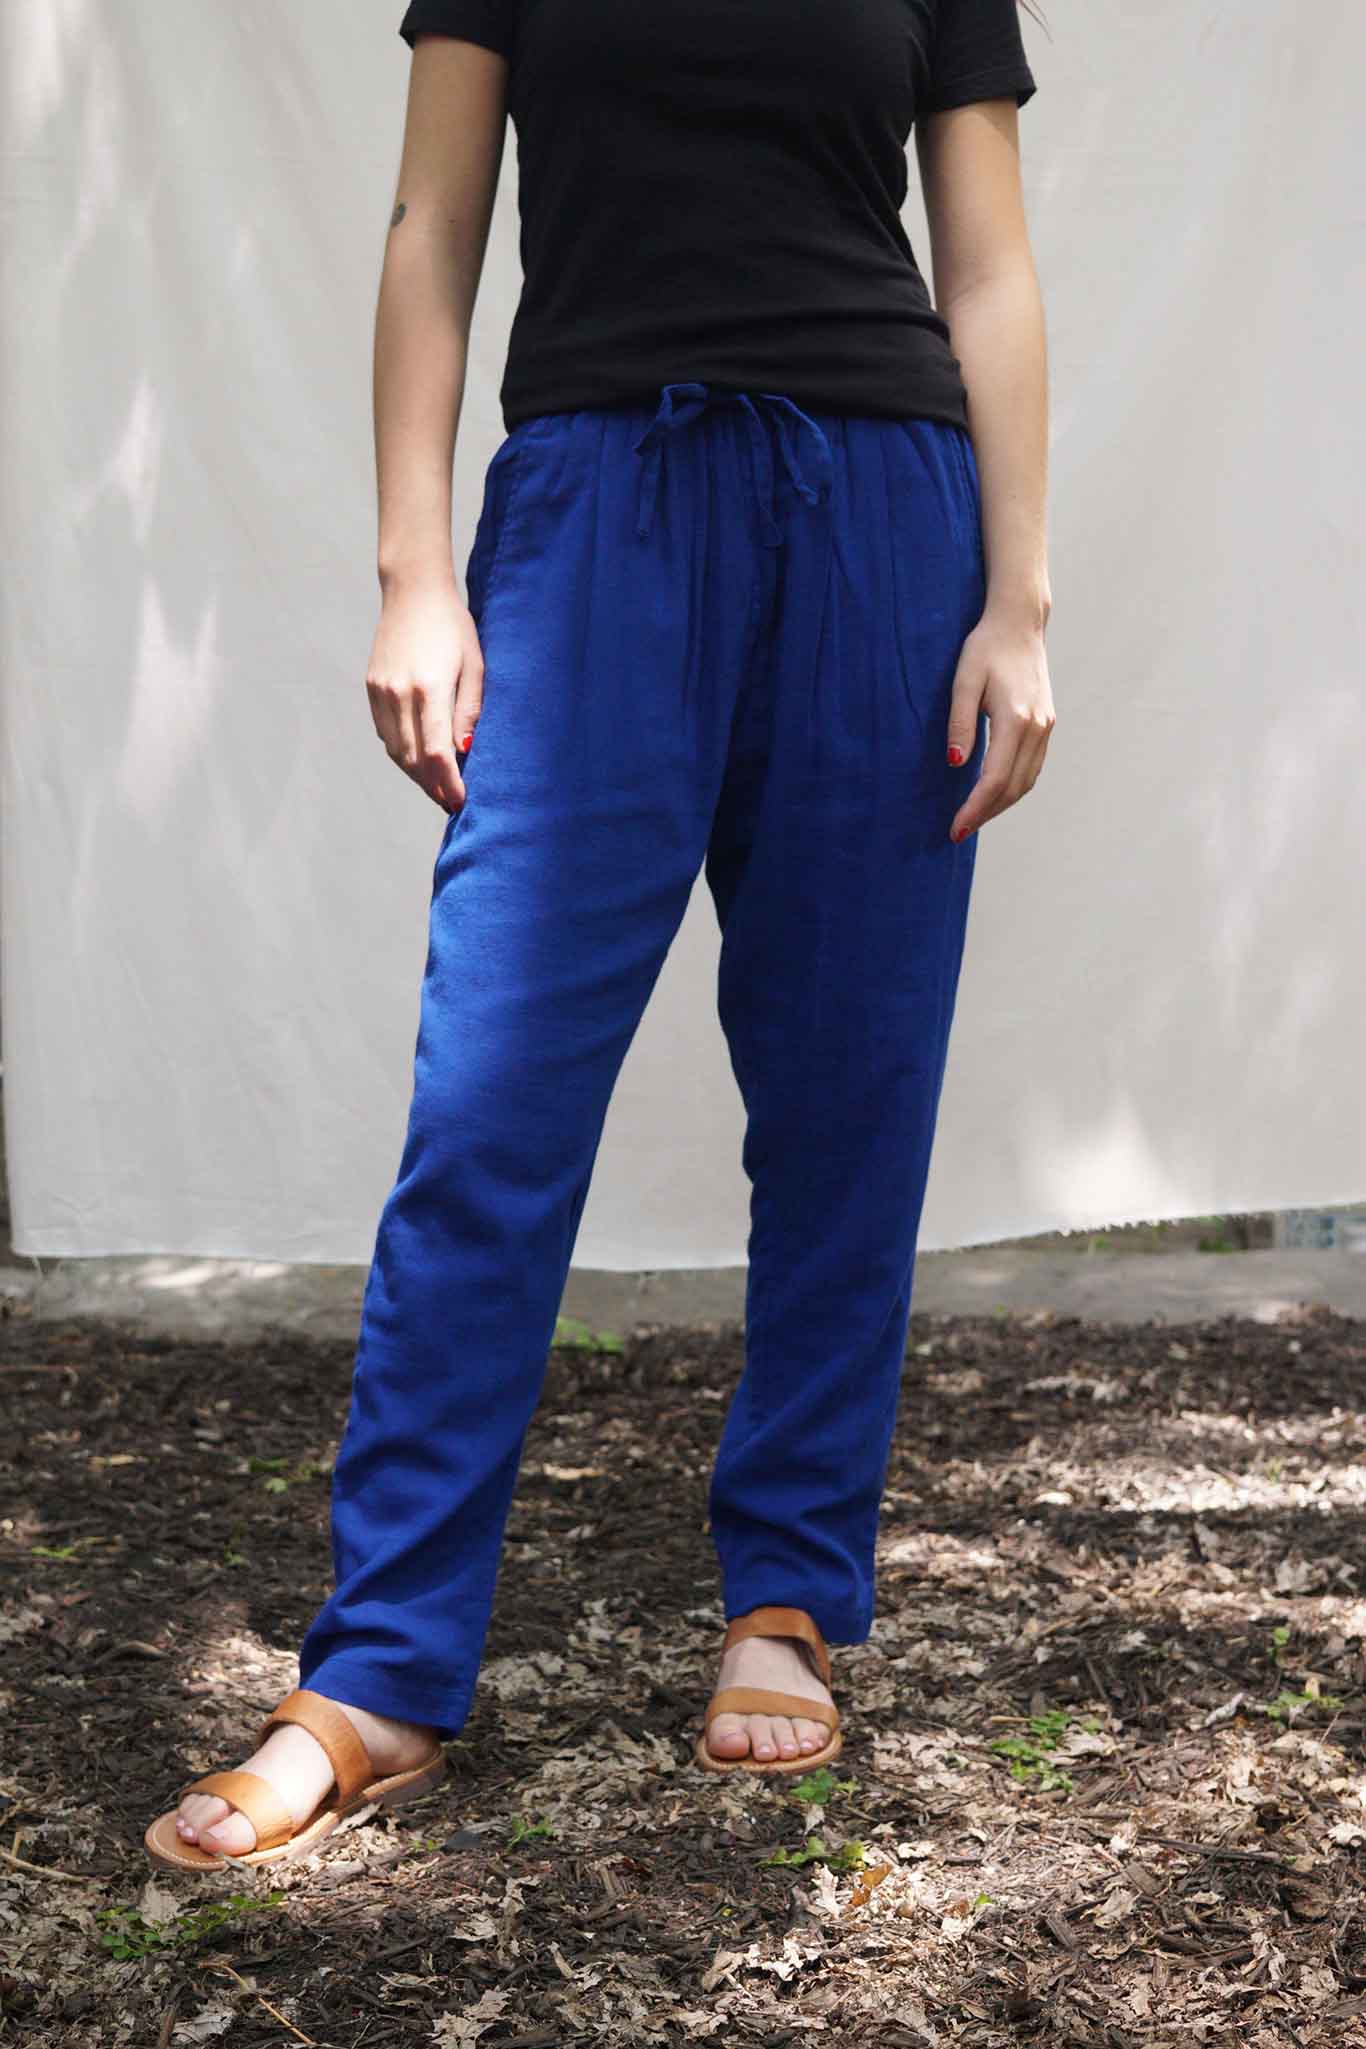 Cotton summer drawstring pant with tapered legs. Brooklyn Style